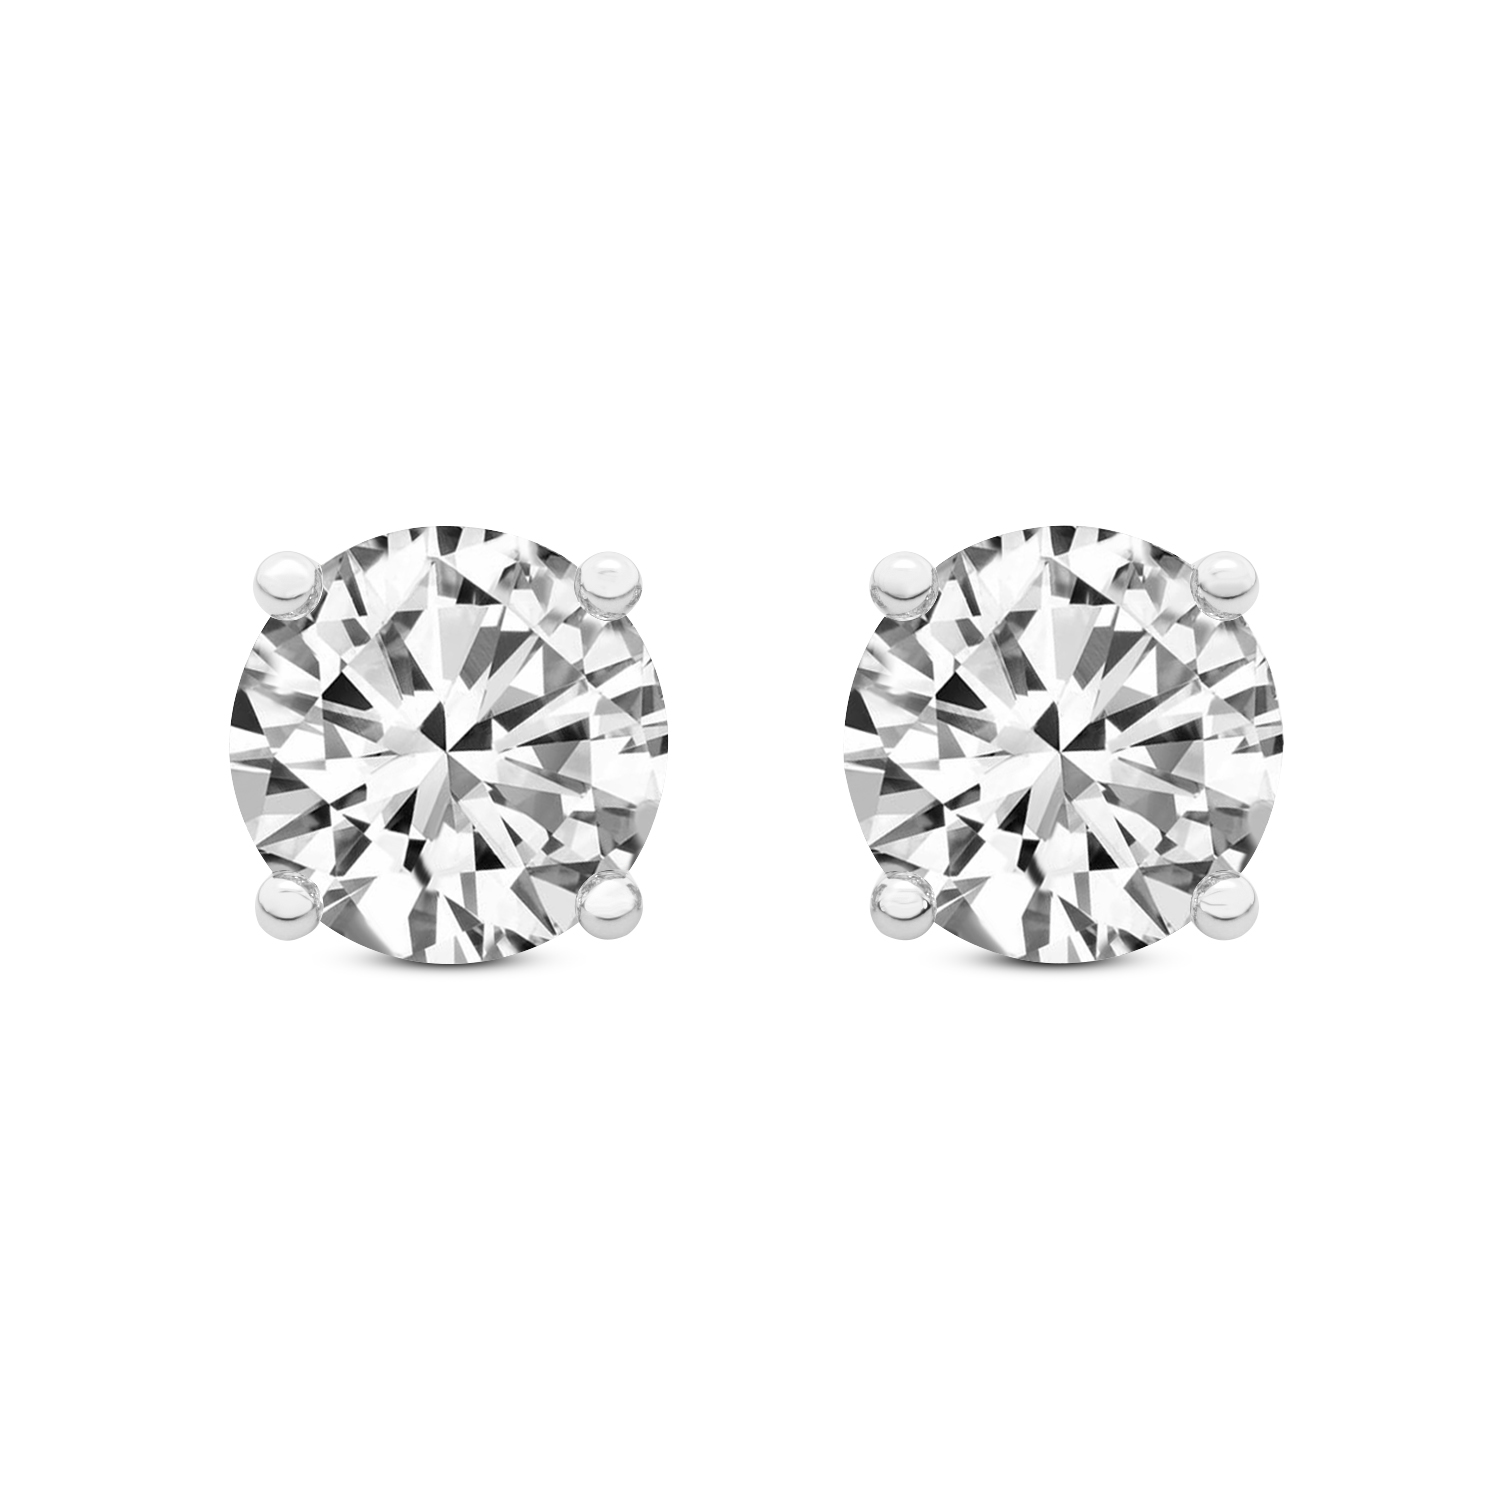 4 Prong Round Lab Diamond Stud Earrings white gold earring, small front view